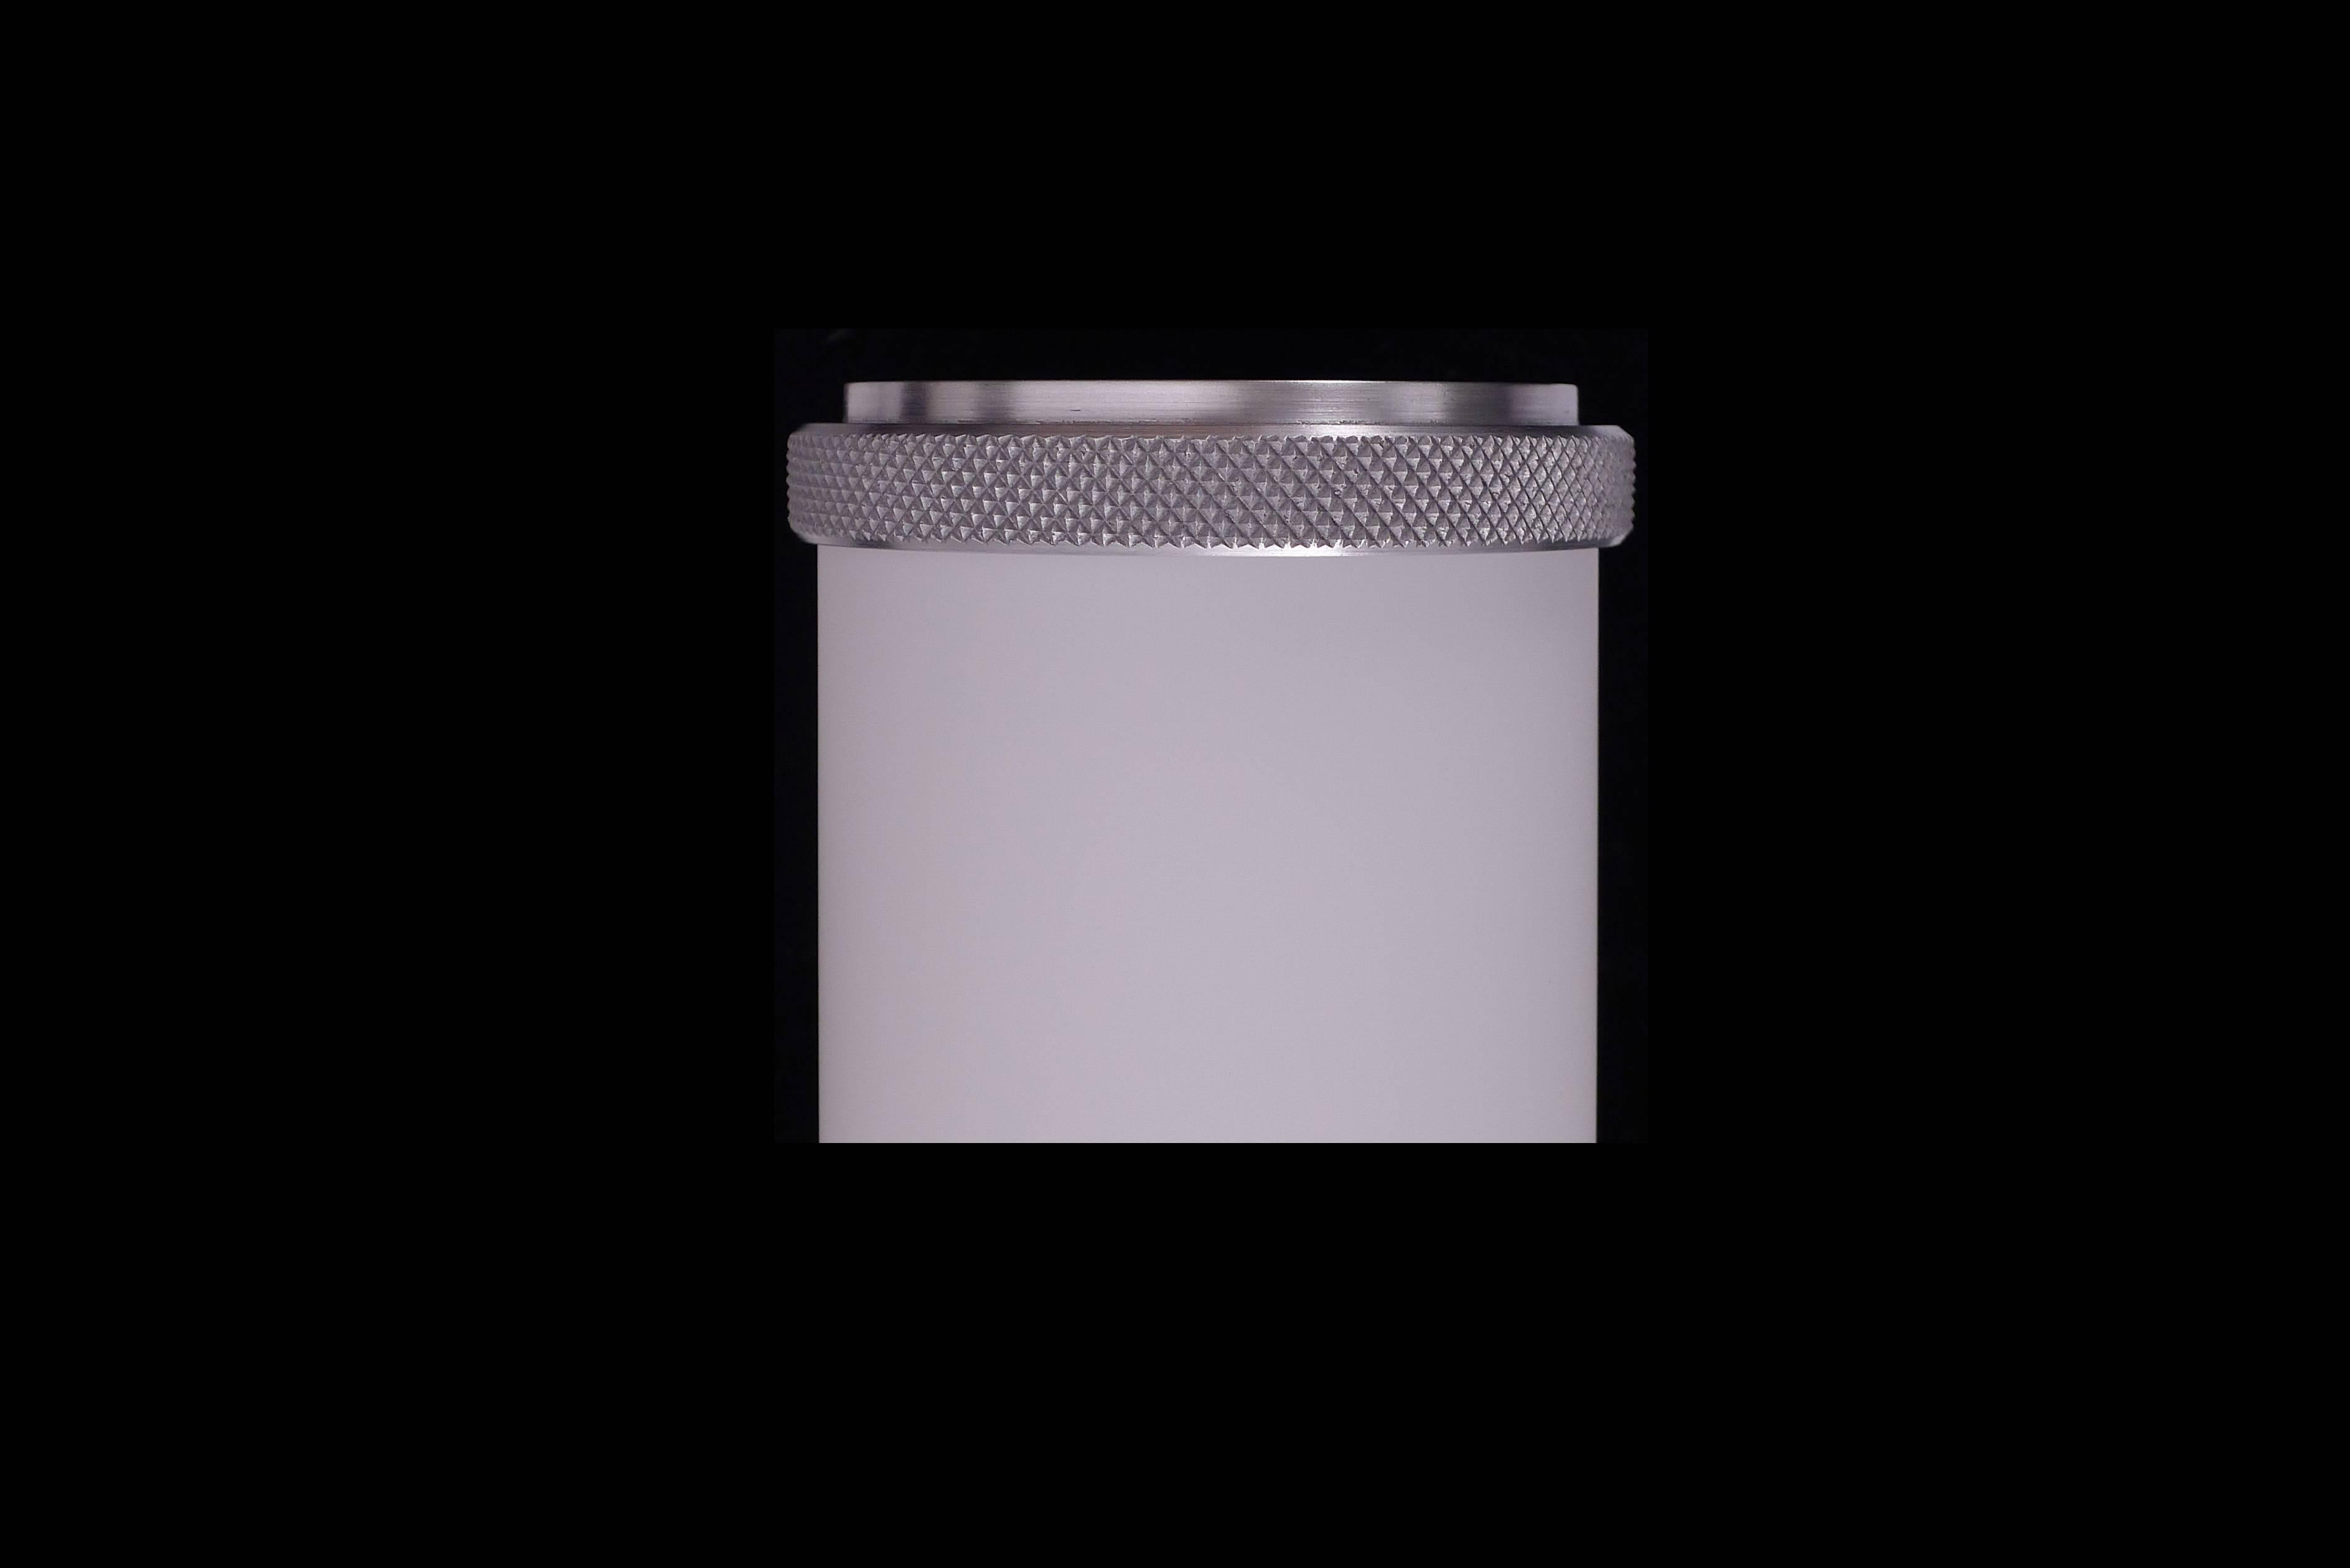 Glass sconce with knurled aluminum finials top and bottom. Rectangular aluminum backplate. In the manner of streamline moderne. LED Lamped, 3000k standard color temperature. Can also be mounted horizontally.

Architect, Sandy Littman of Duesenberg